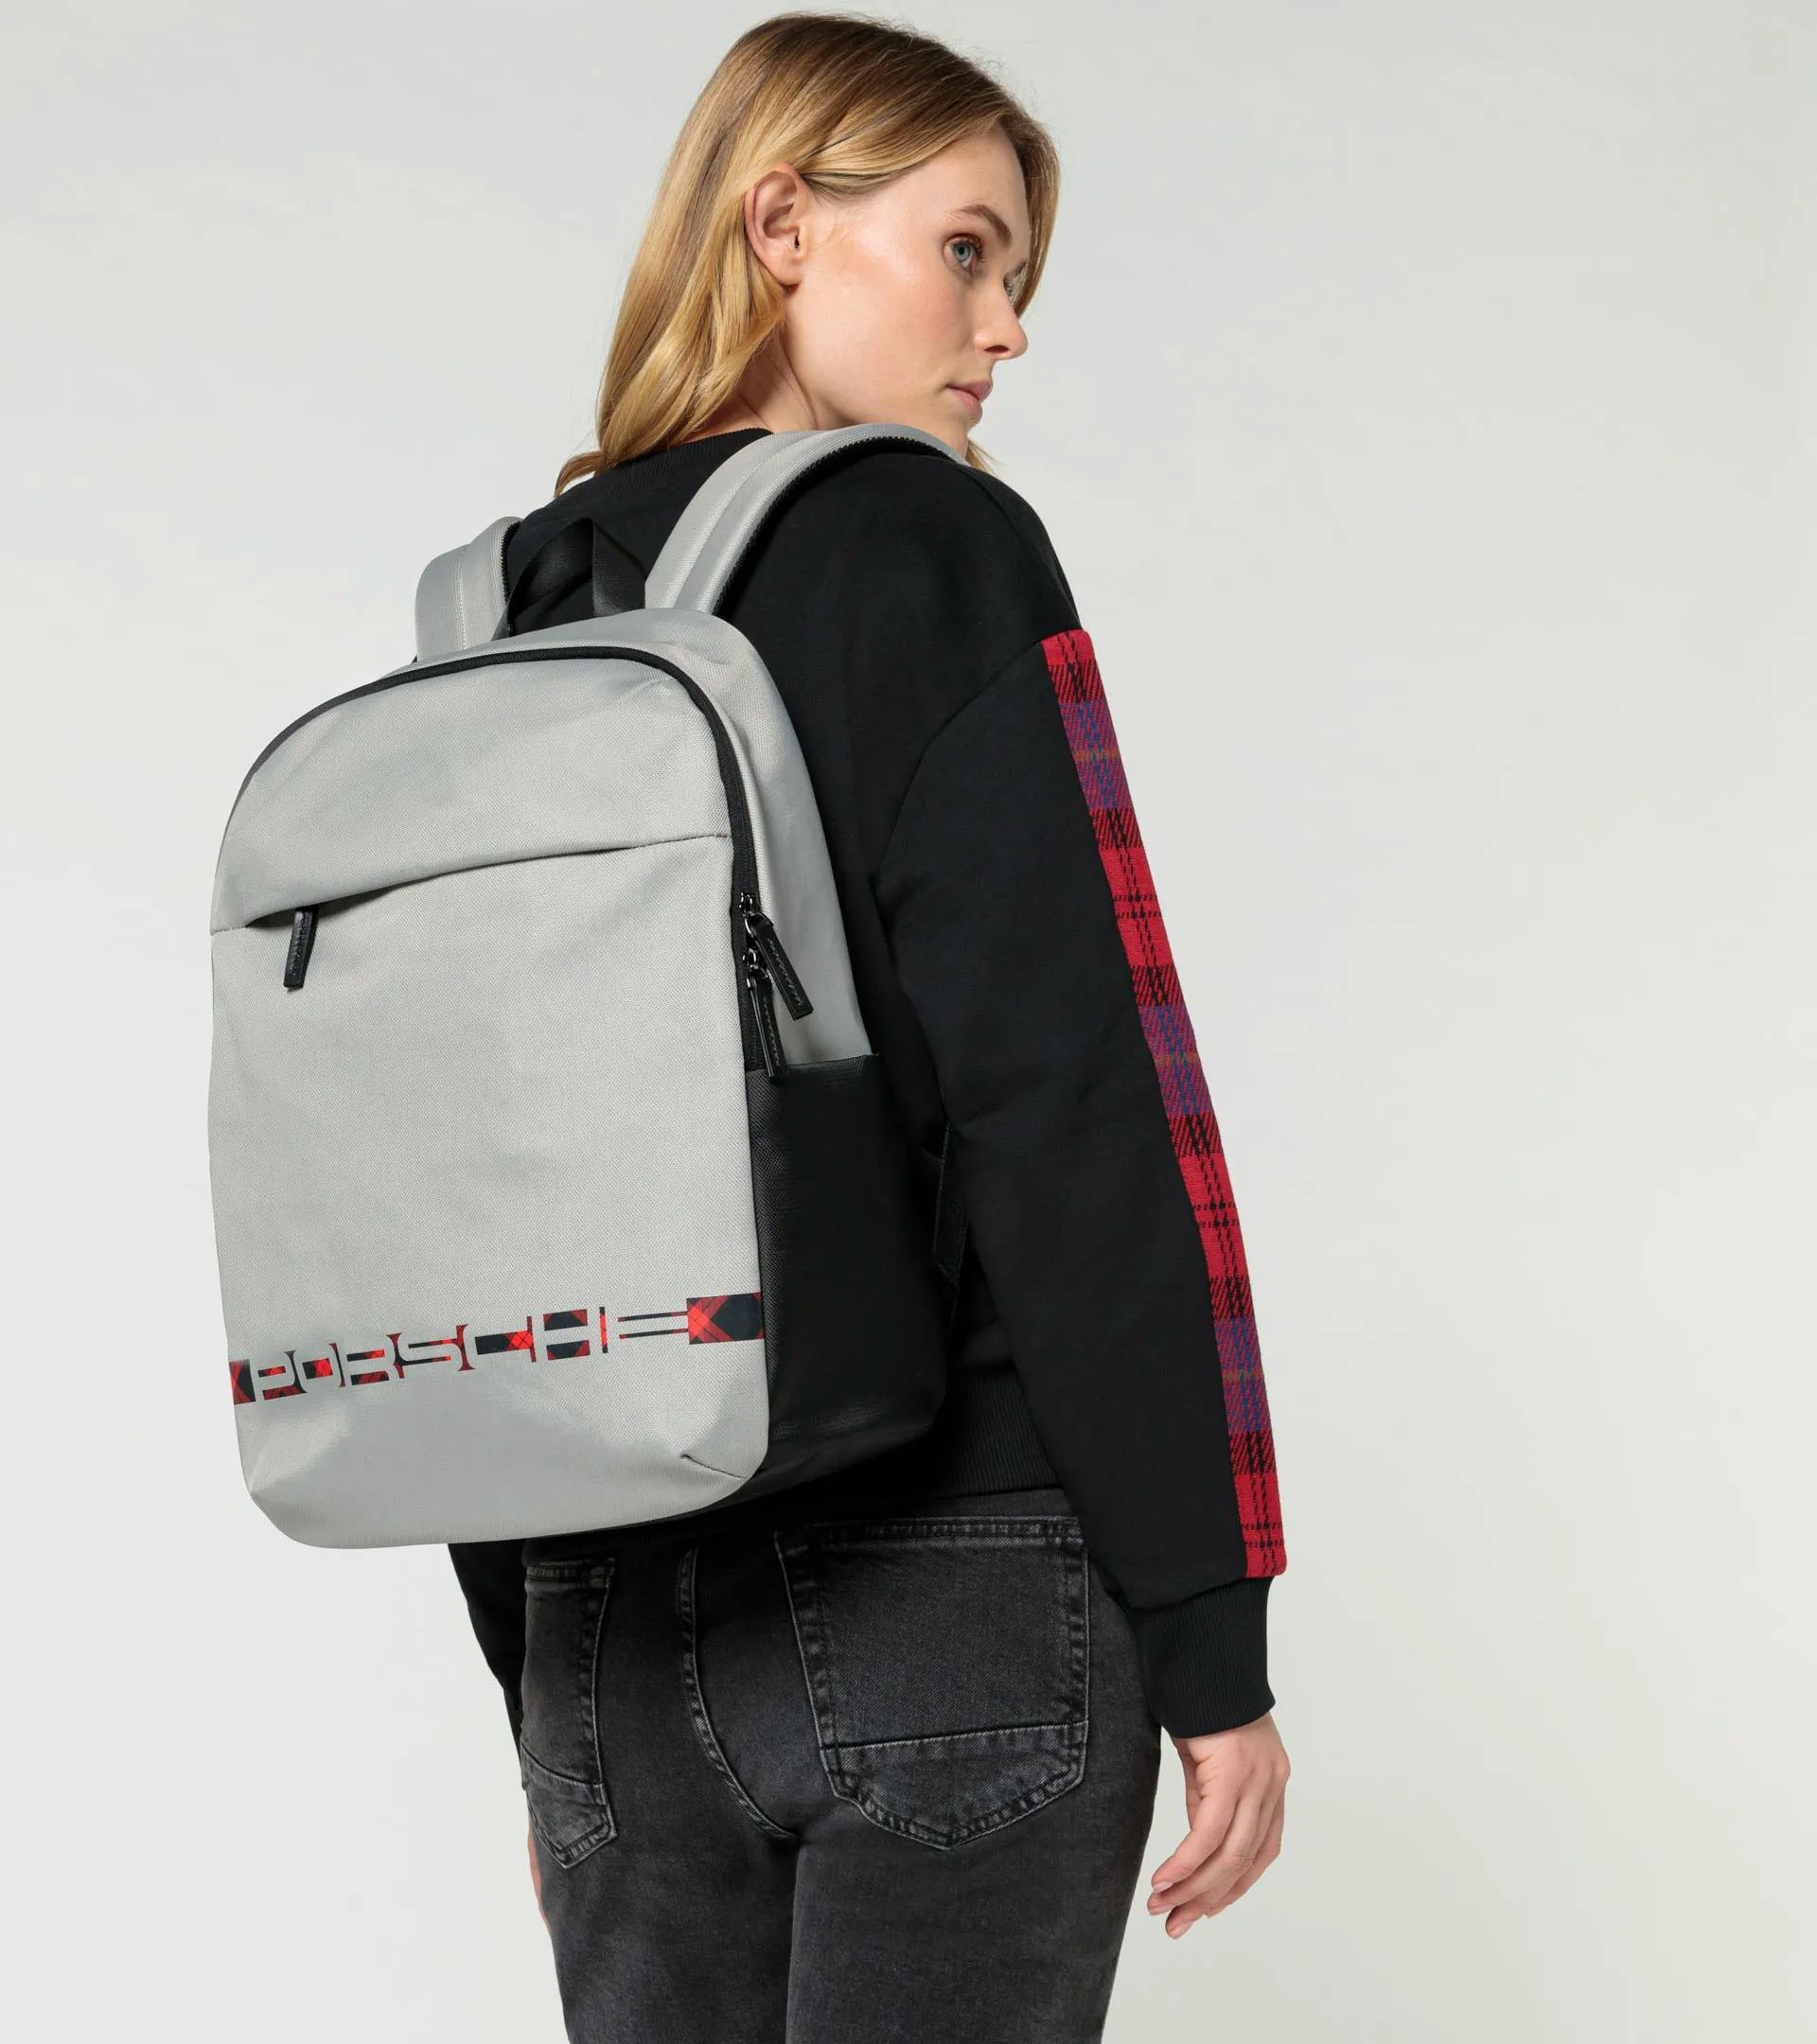 Backpack – Turbo No. 1 7